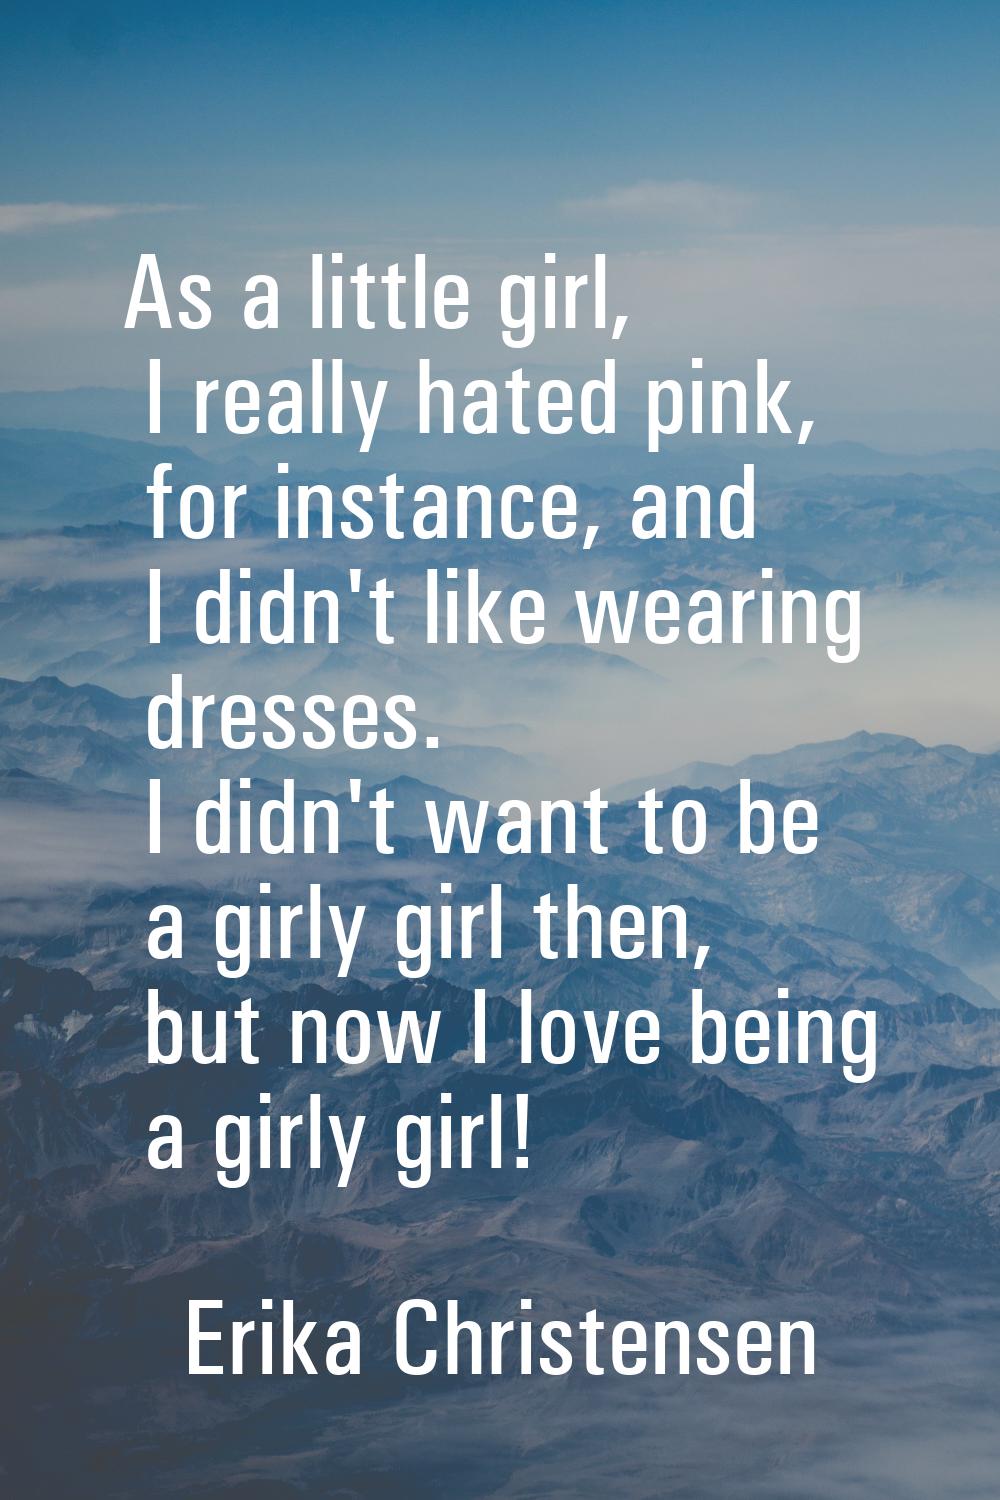 As a little girl, I really hated pink, for instance, and I didn't like wearing dresses. I didn't wa